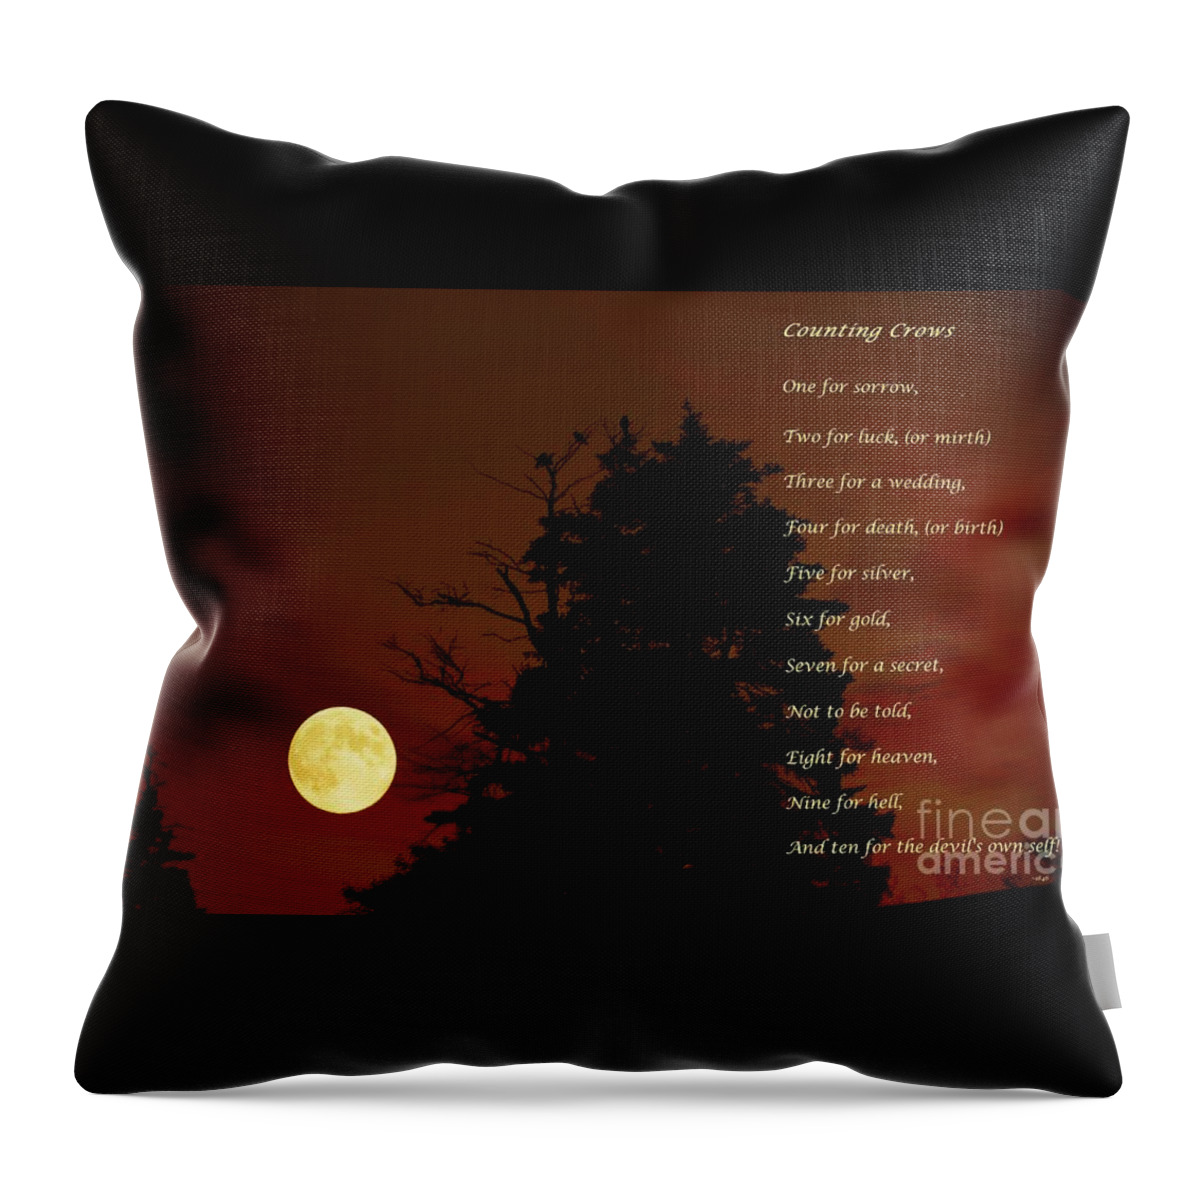 Counting Crows Throw Pillow featuring the photograph Counting Crows - Old Superstitious Nursery Rhyme by Barbara A Griffin